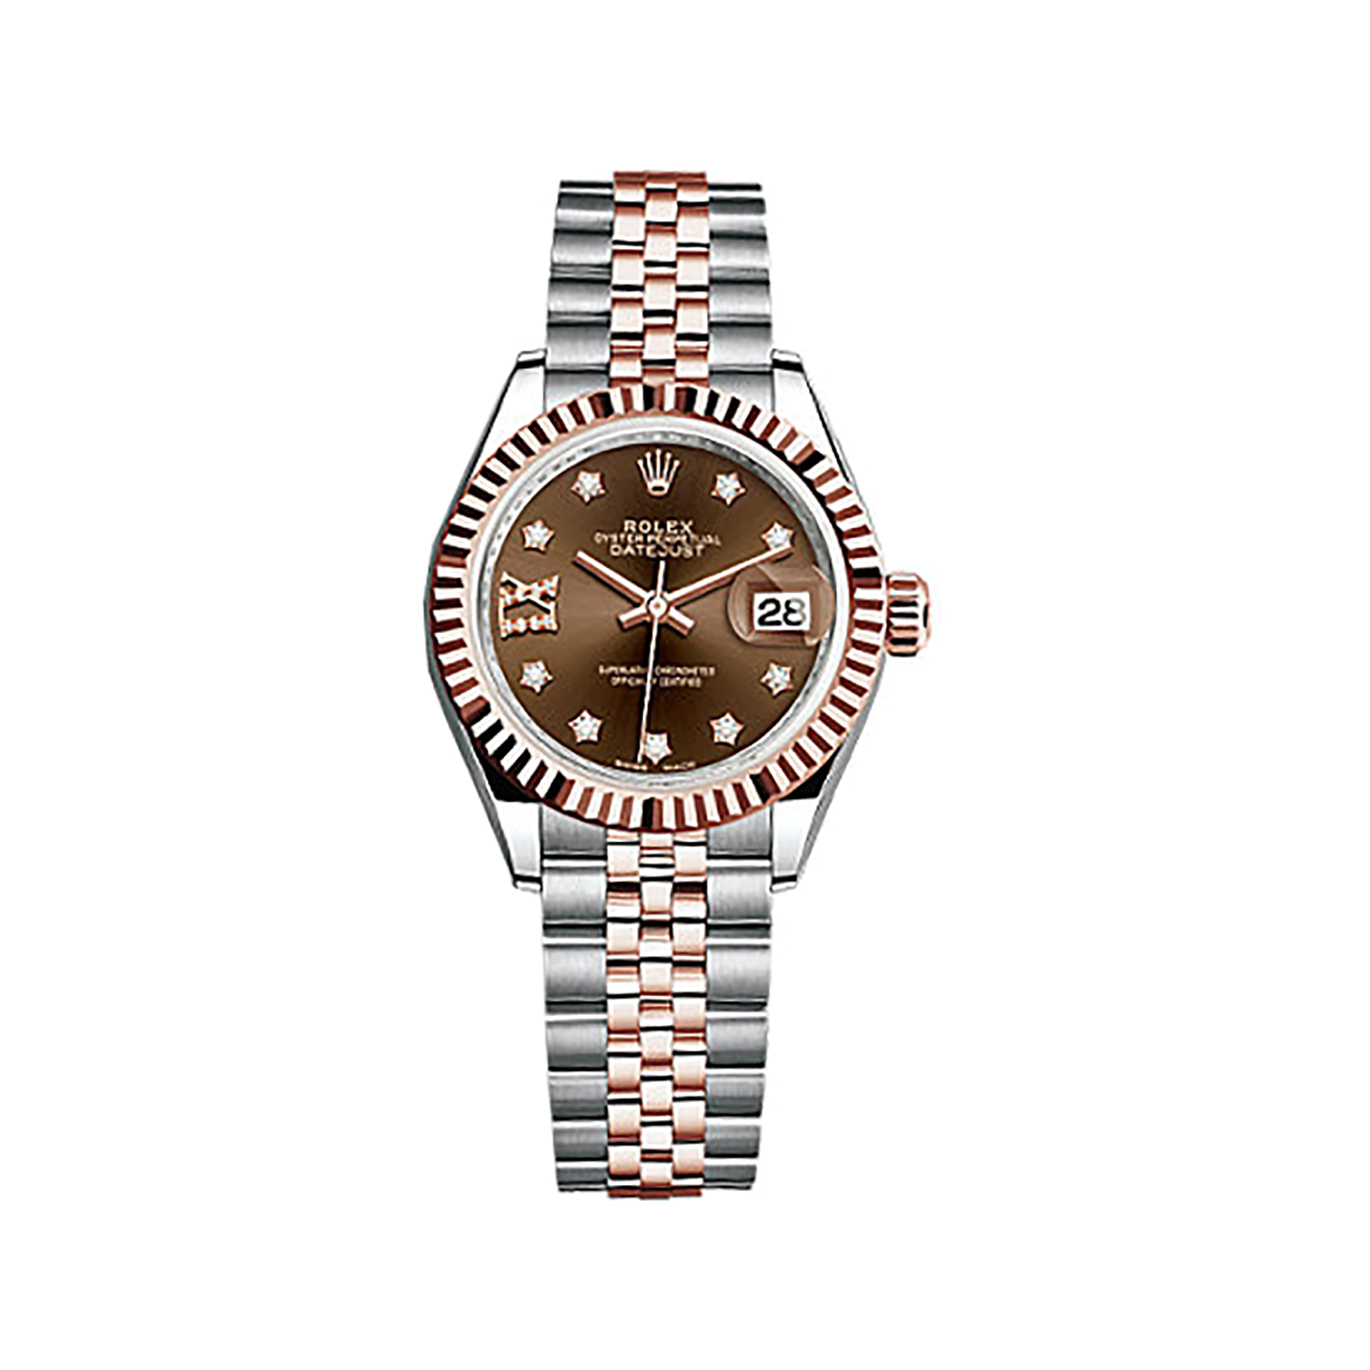 Lady-Datejust 28 279171 Rose Gold & Stainless Steel Watch (Chocolate Set with Diamonds) - Click Image to Close